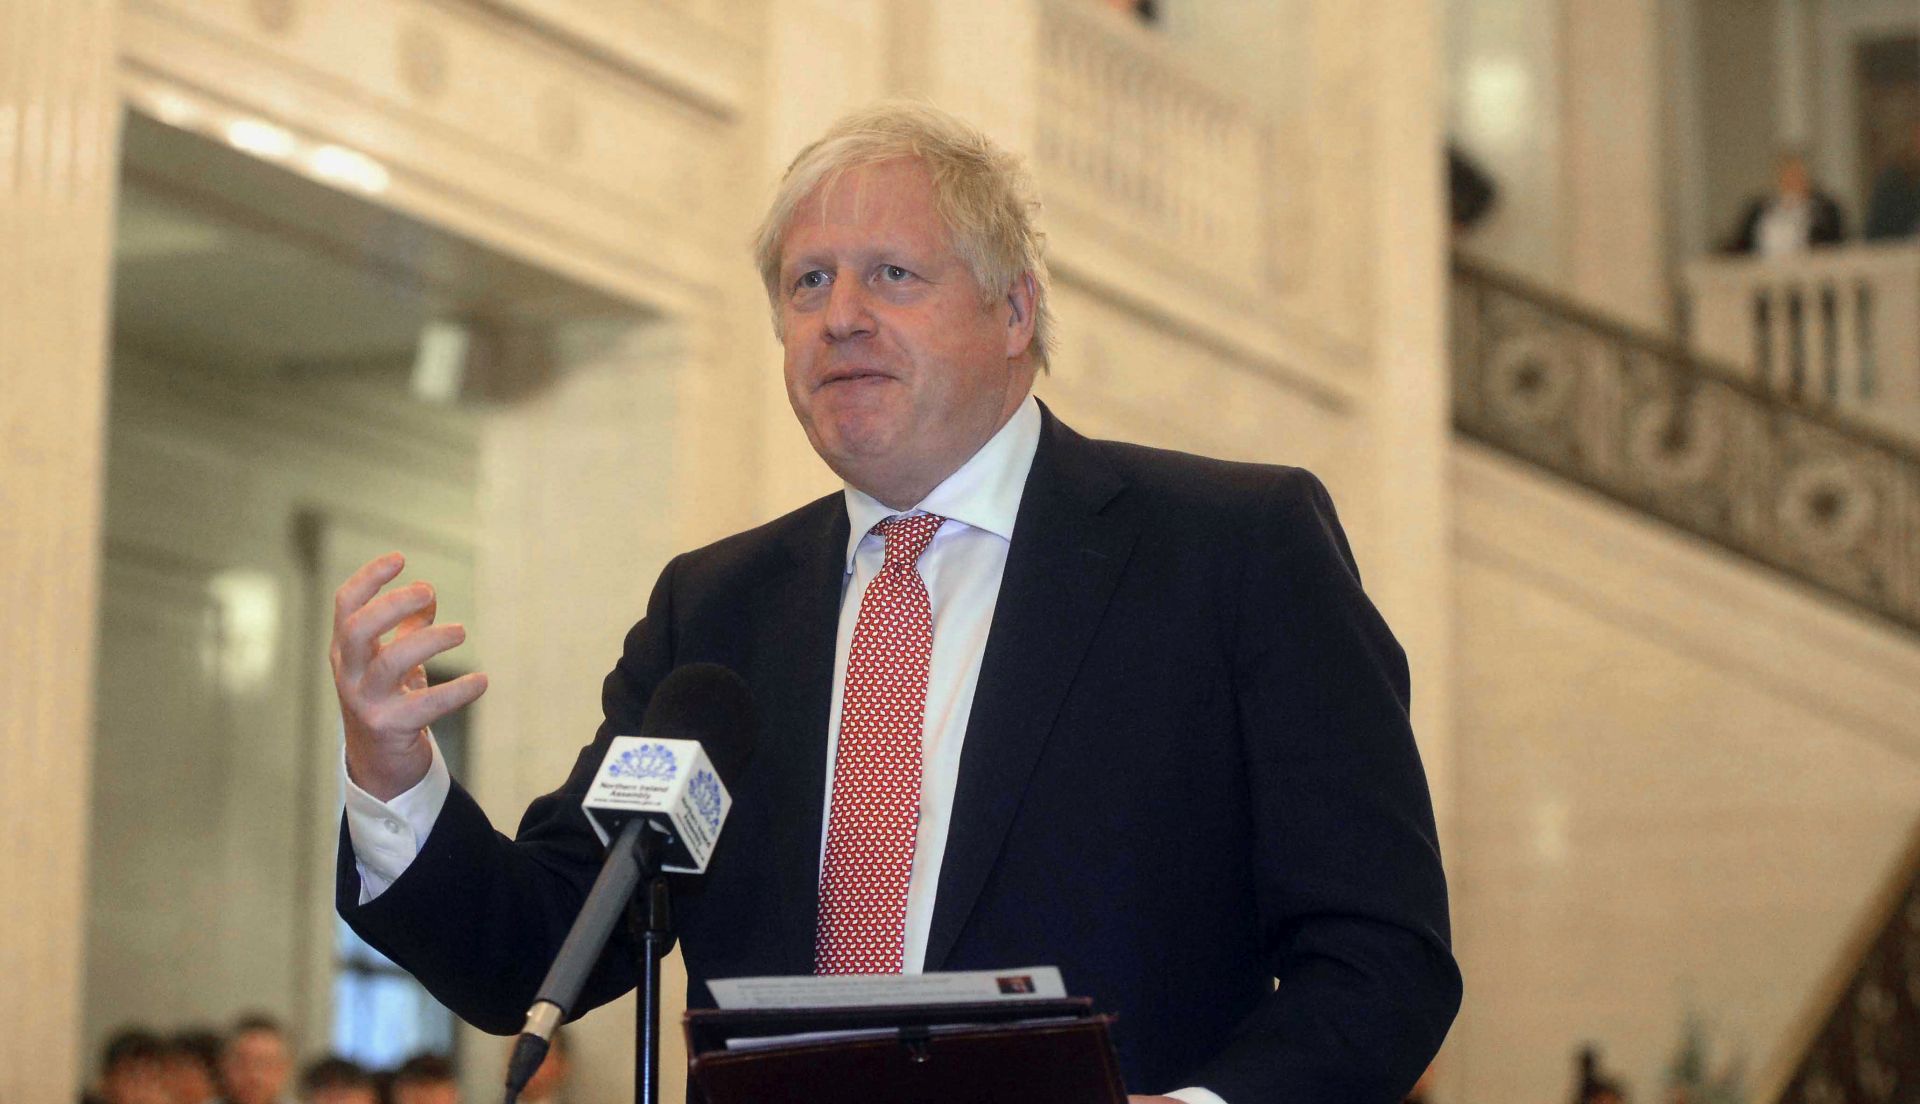 epa08124919 Britain's Prime Minister Boris Johnson speaks at Stormont government buildings in Belfast, Northern Ireland, as he meets with First Minister Foster for talks regarding the new power sharing institutions in Northern Ireland, 13 January 2019.  EPA/MARK MARLOW Best quality available